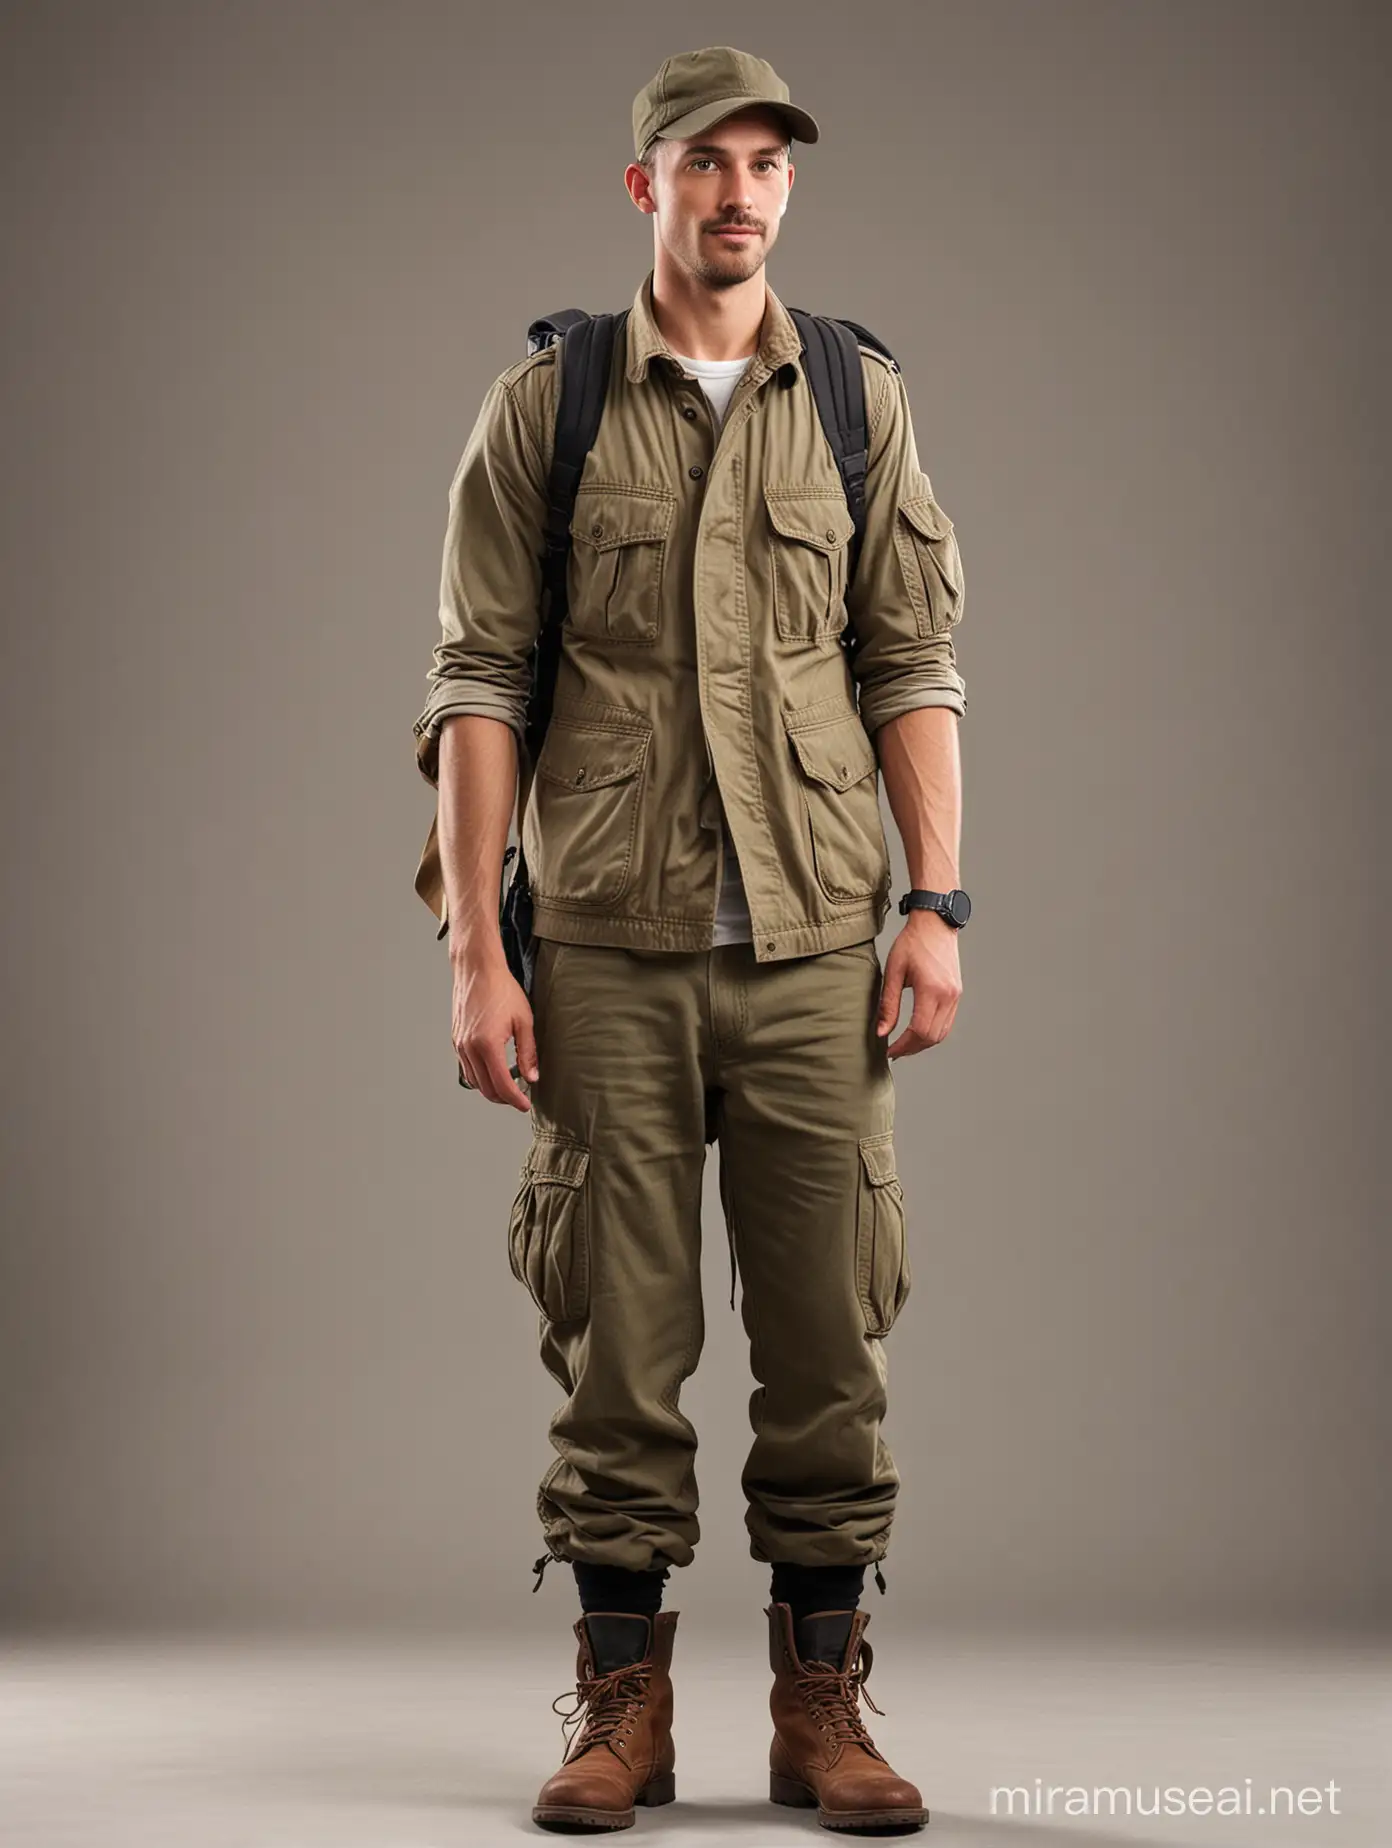 30 year old man, war correspondant, fit body, wear jeans cargo trousers and canvas military  khaki jacket, brown leather combat boot, black baseball hat, carryng photo camera, backpack, reporter, journalist, full body, head to toe

